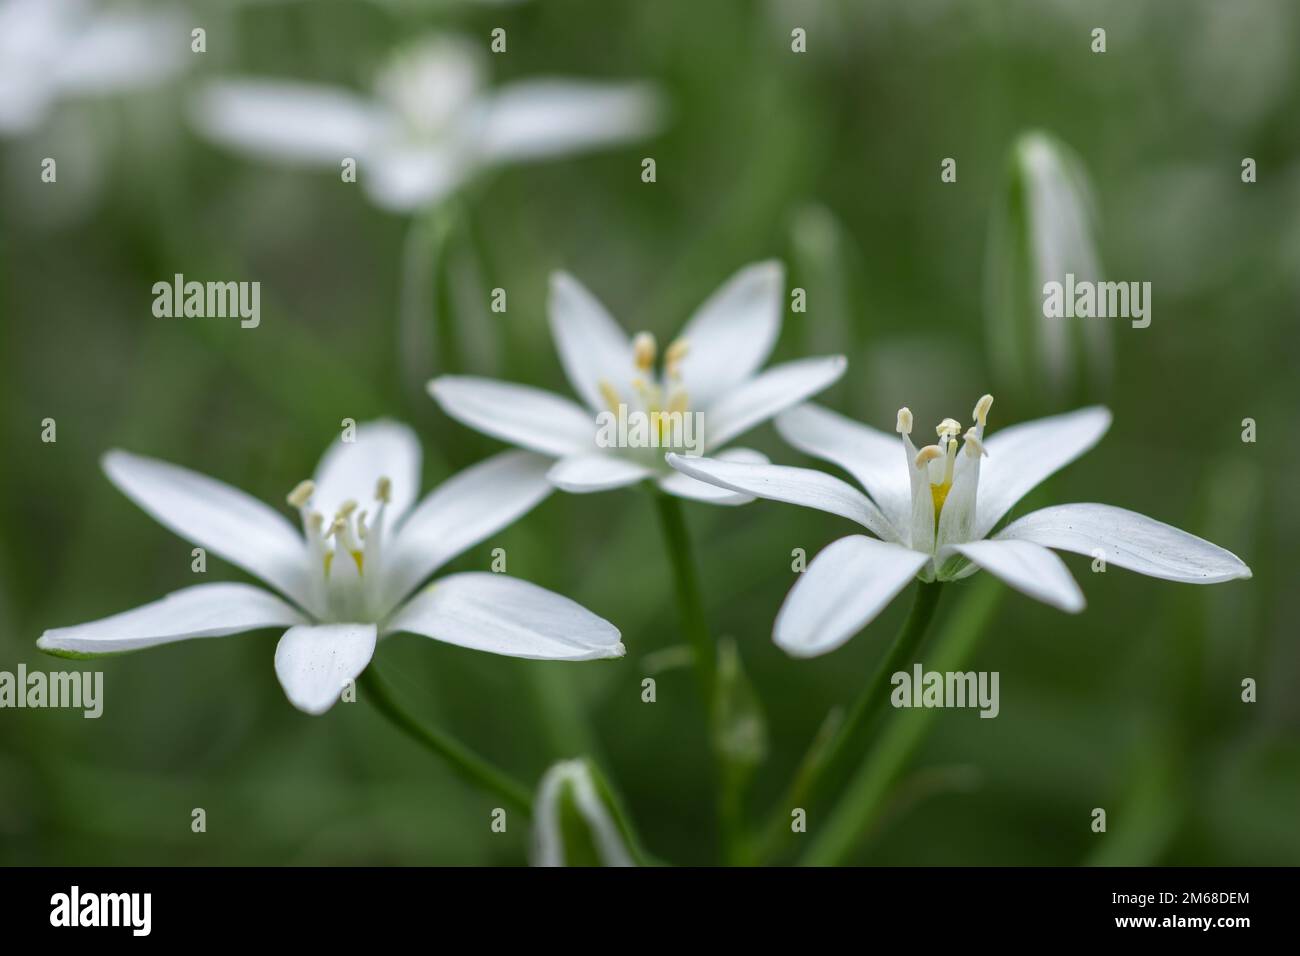 Ornithogalum flowers. beautiful bloom in the spring garden. Many white flowers of Ornithogalum. Ornithogalum umbellatum grass lily in bloom, small orn Stock Photo